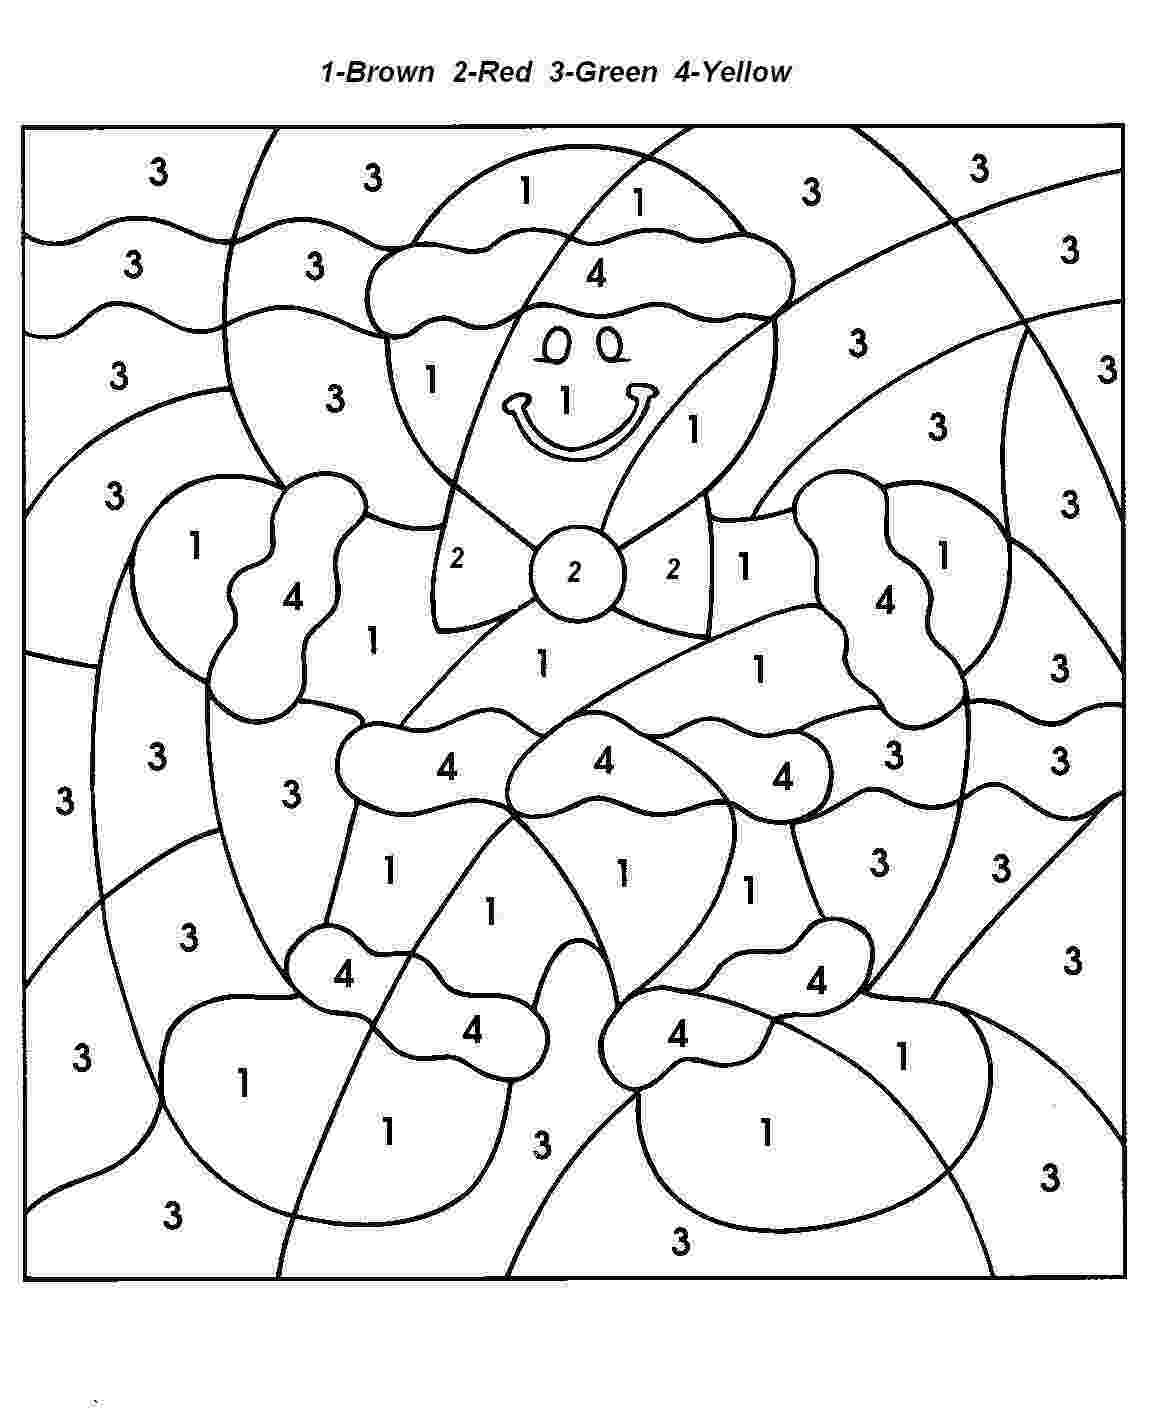 coloring by number worksheets free color by numbers worksheets activity shelter by coloring number worksheets 